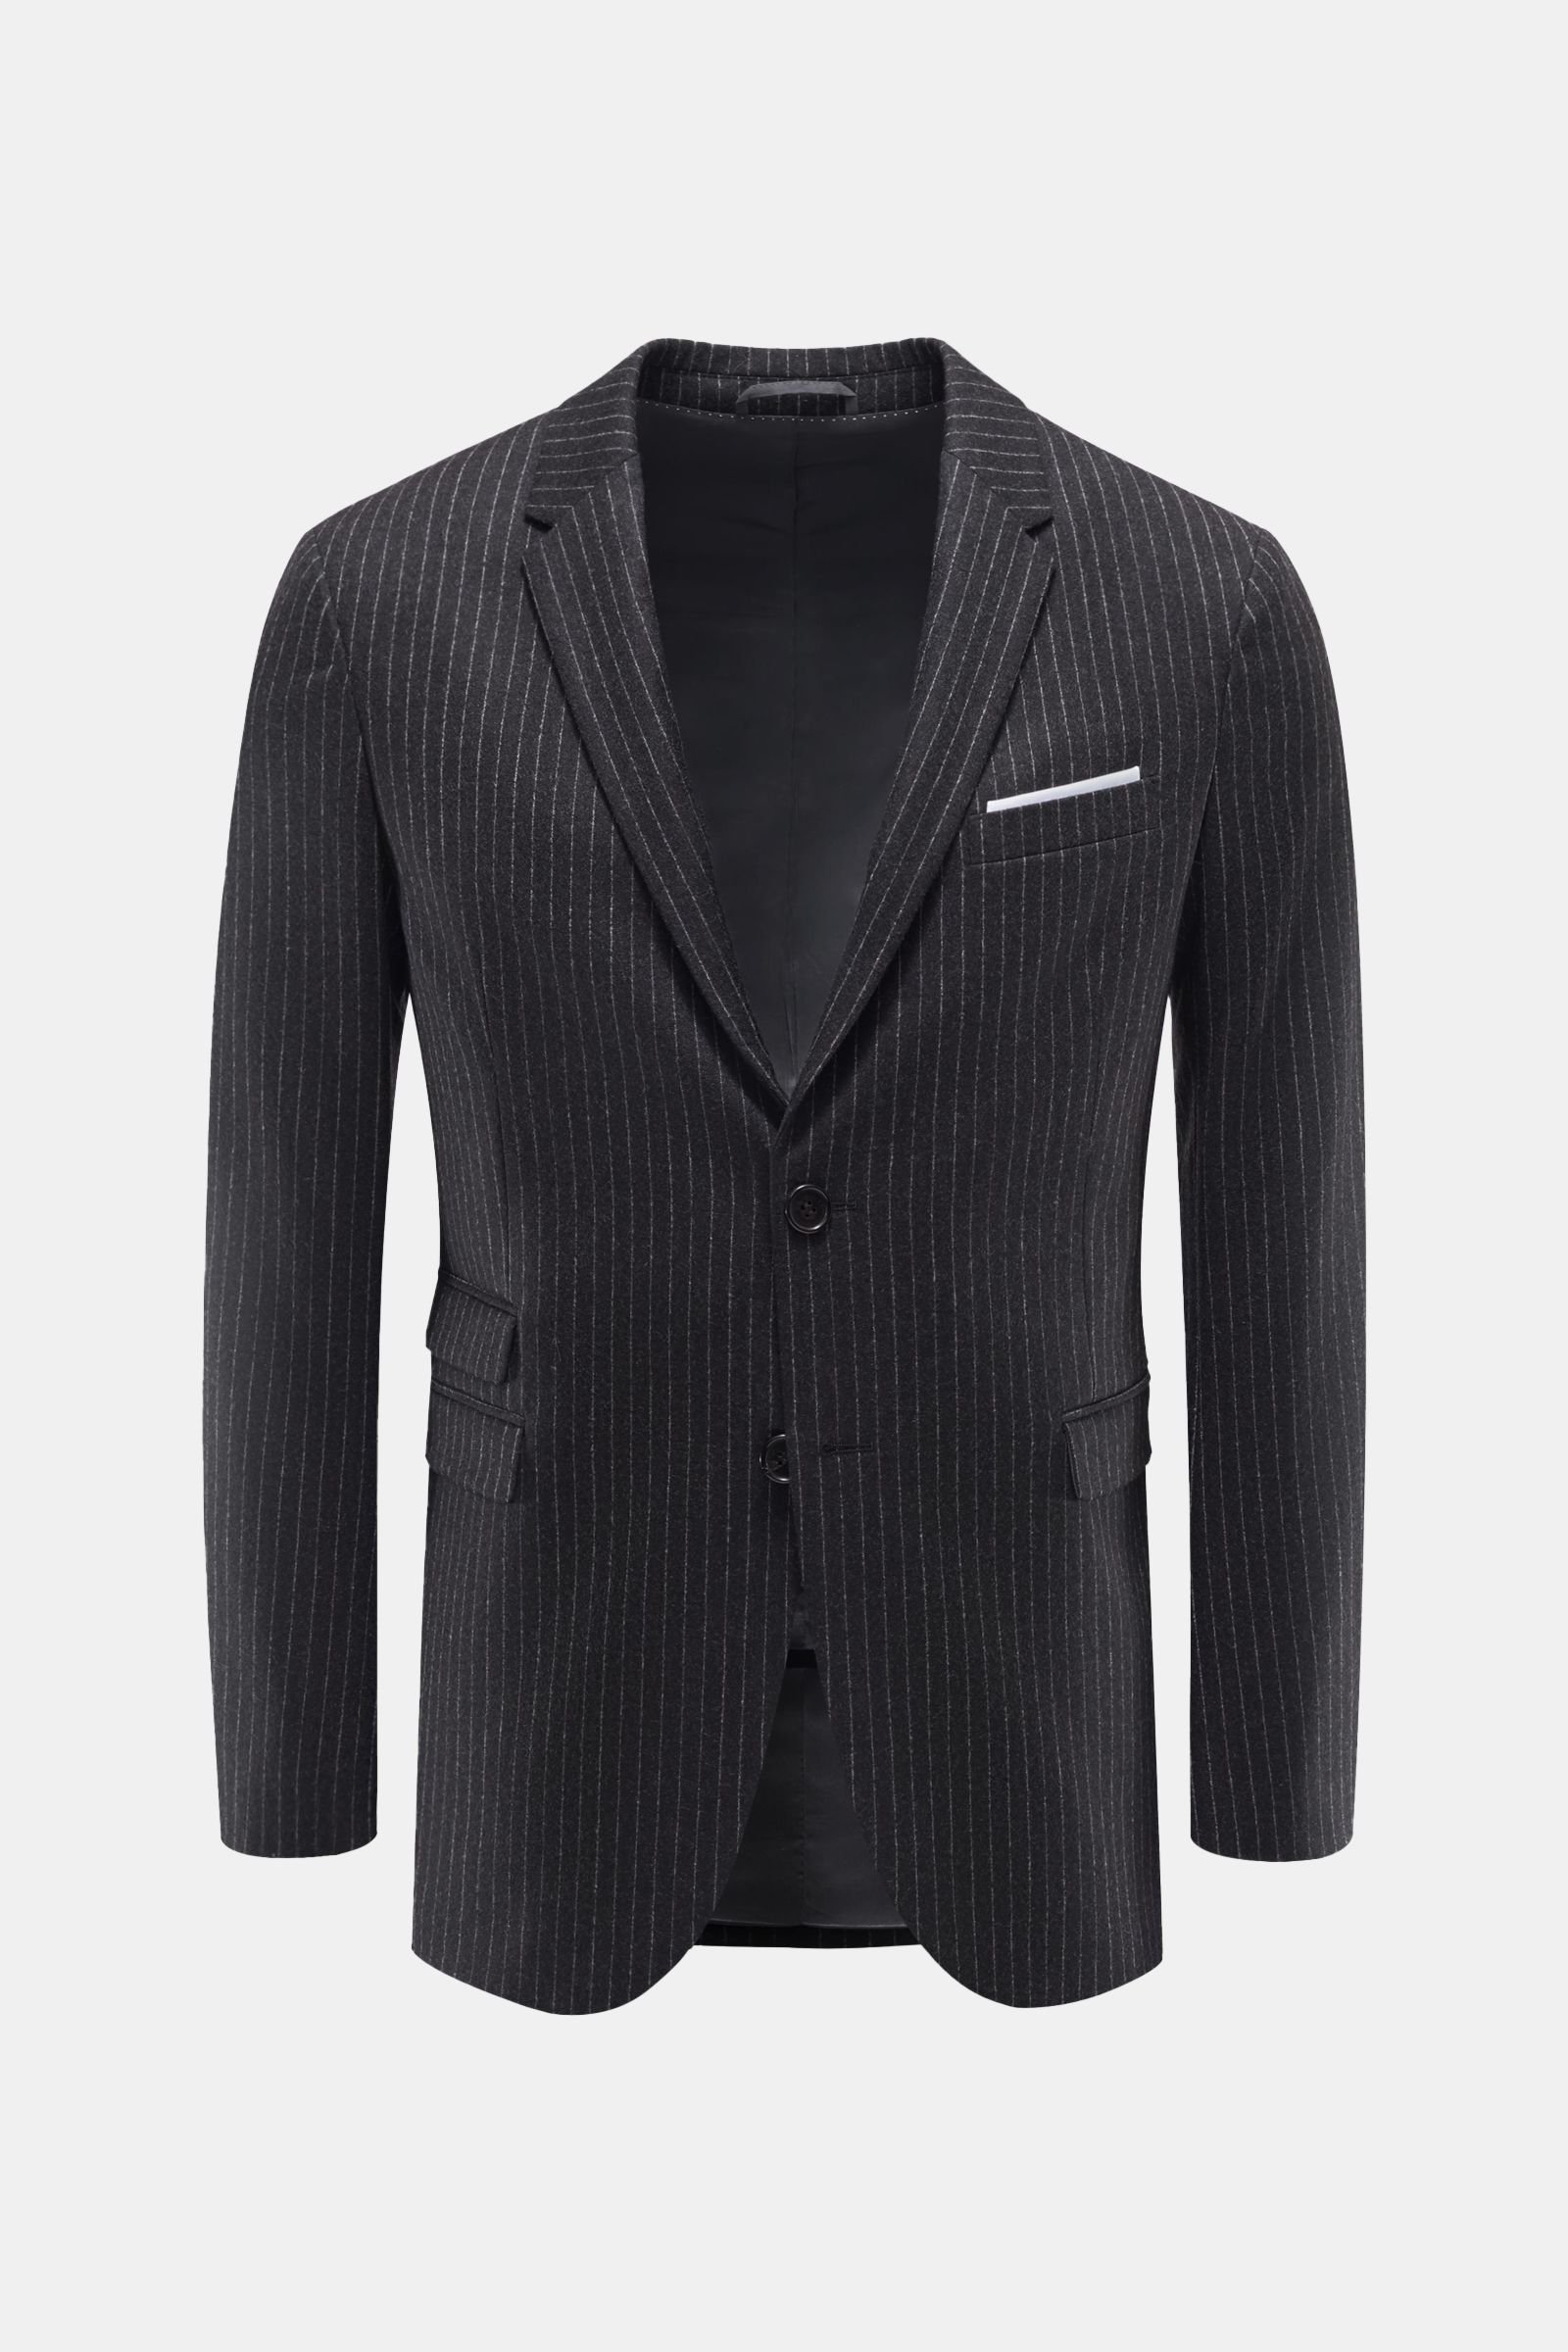 Smart-casual jacket anthracite striped